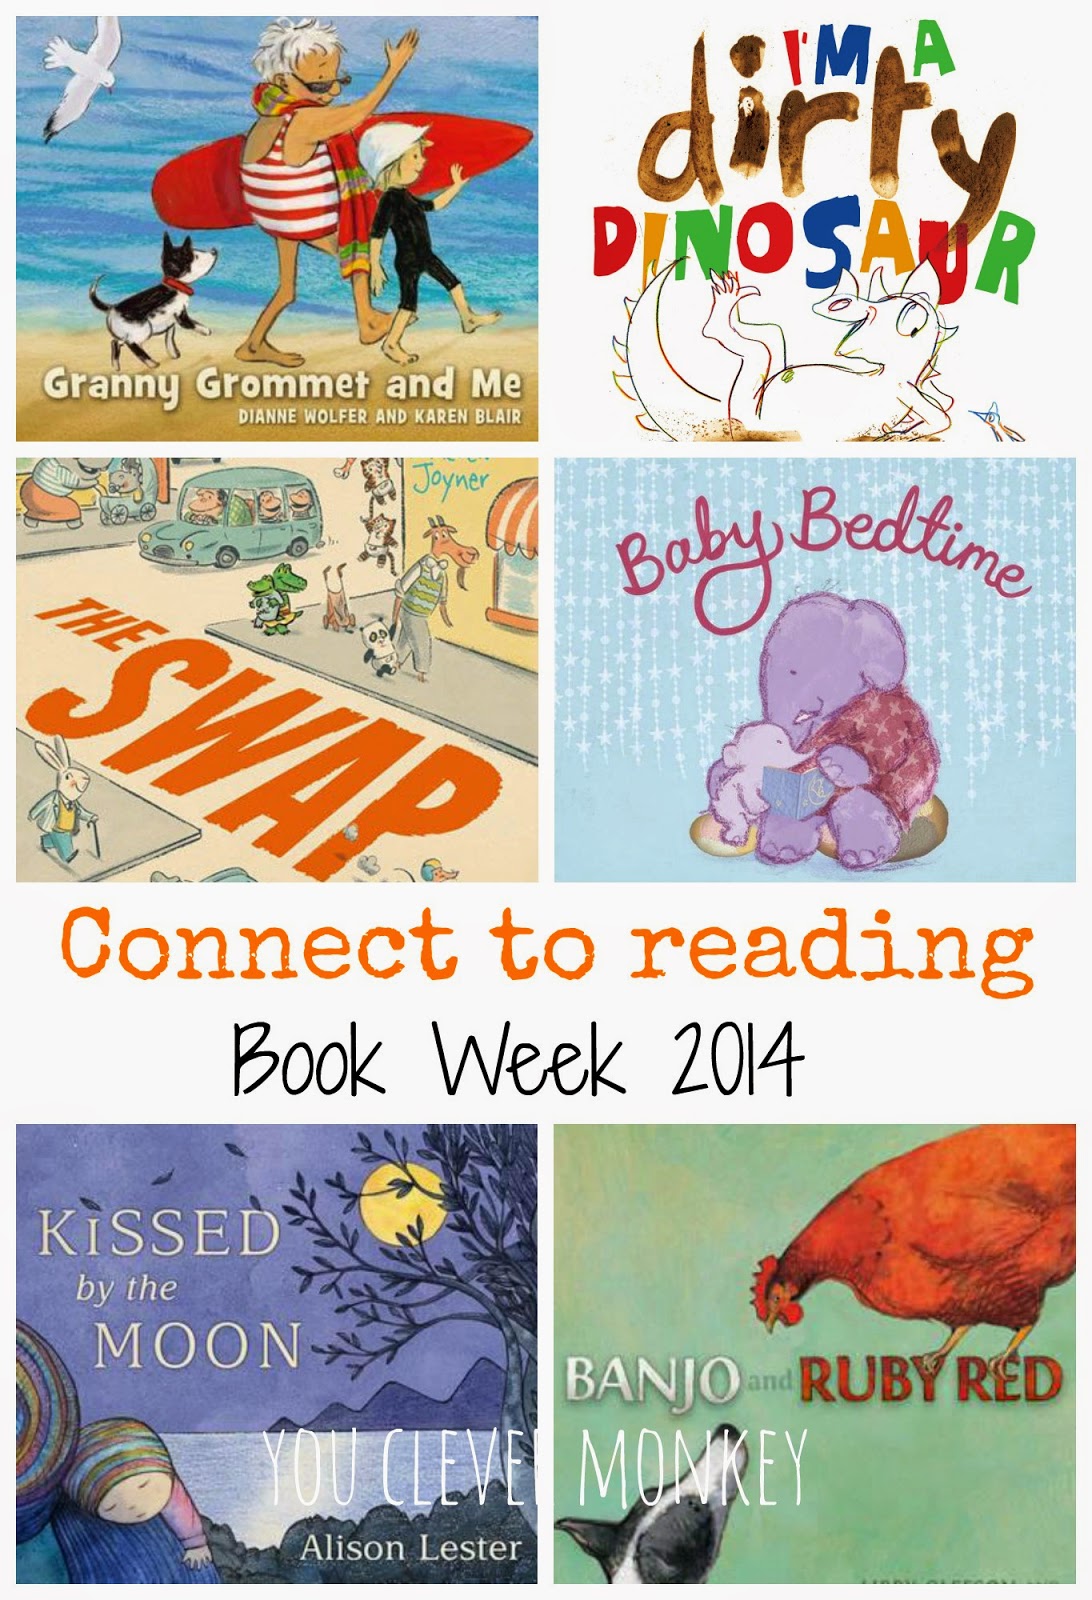 Book Week 2014 - ideas for teaching reading comprehension strategies using this year's early childhood books.  For more, go to http://youclevermonkey.com/